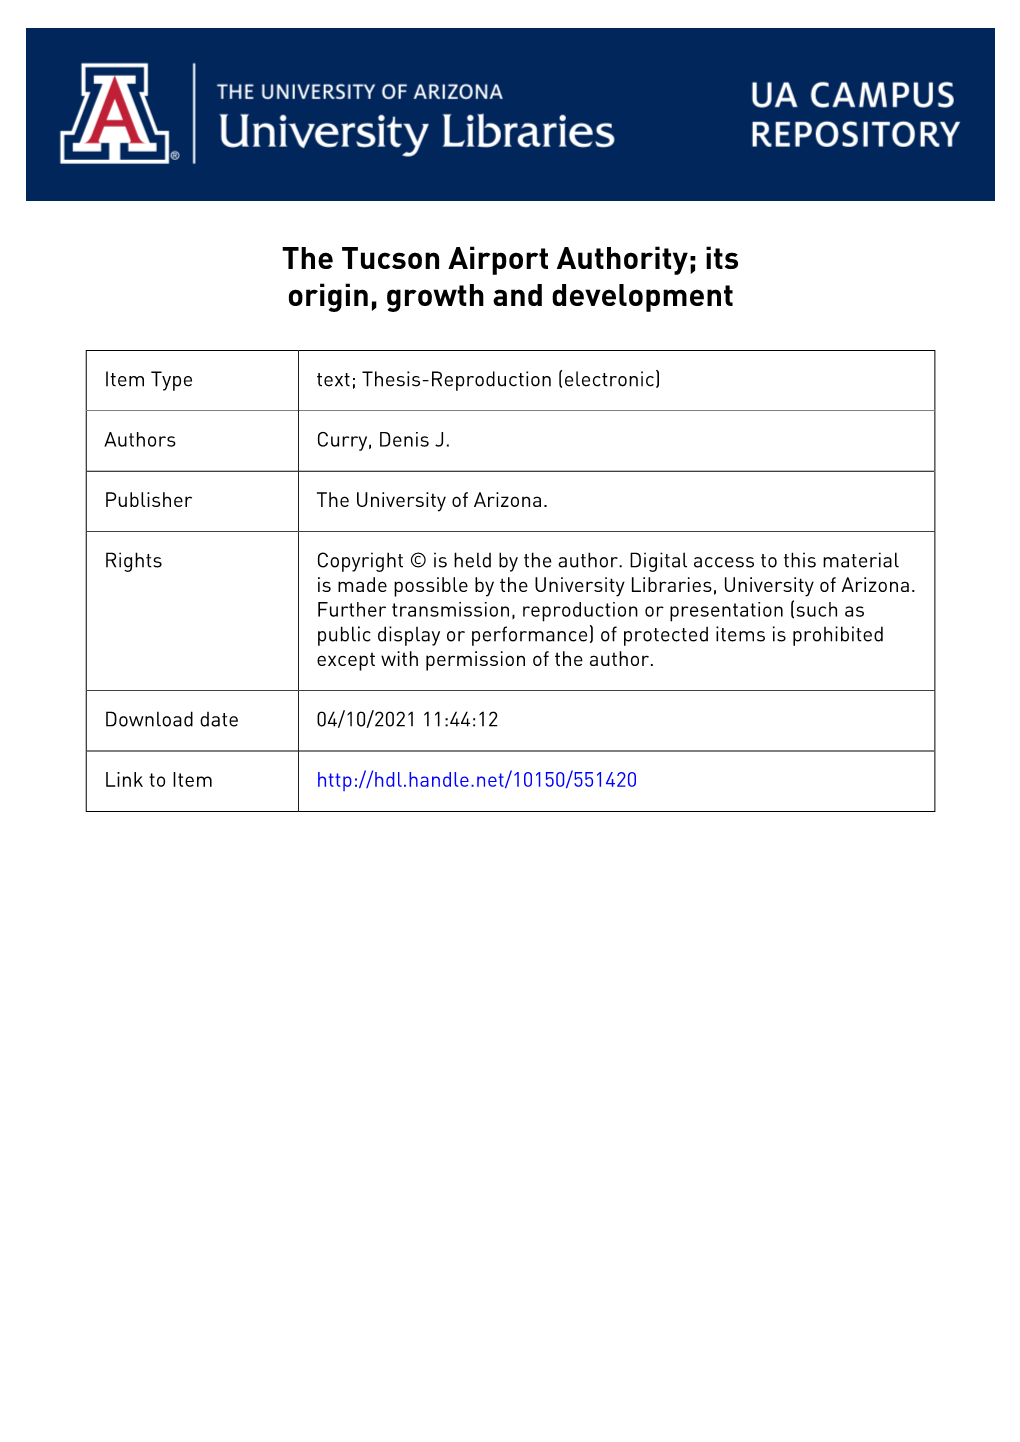 The Tucson Airport Authority; Its Origin, Growth and Development